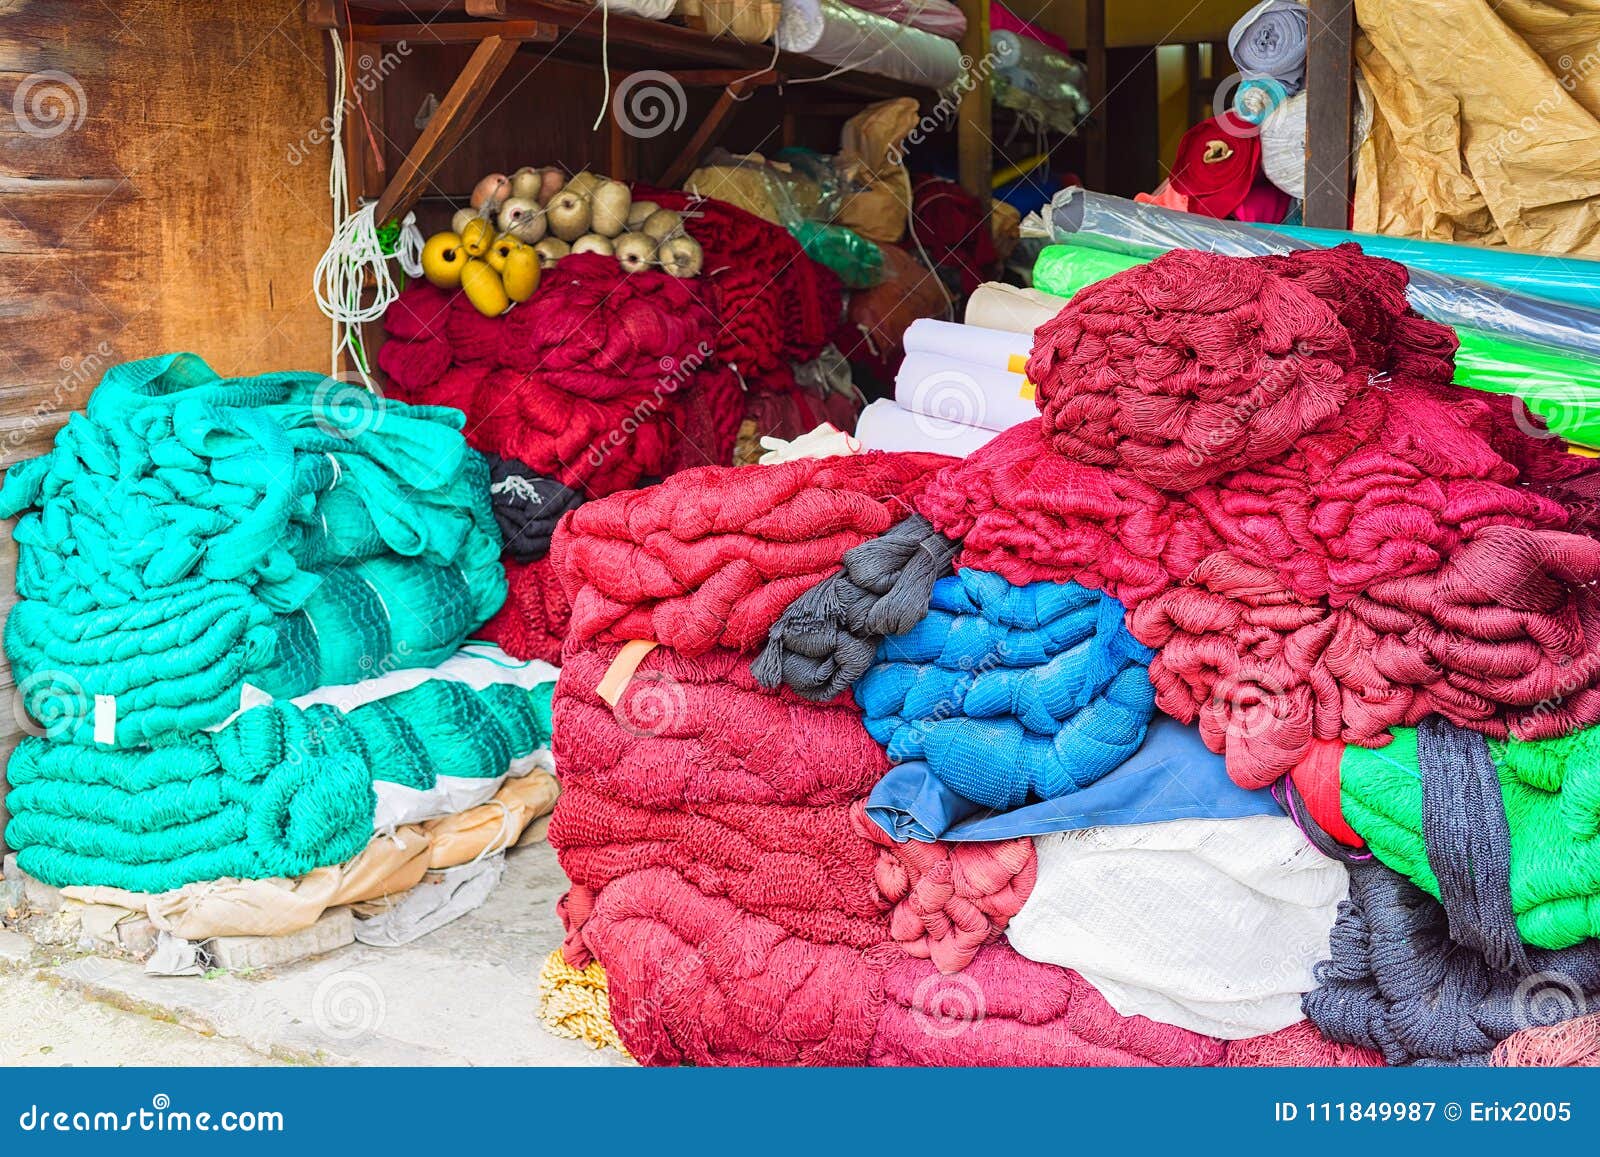 Fishing Net for Sale at Fish Market in Busan Stock Image - Image